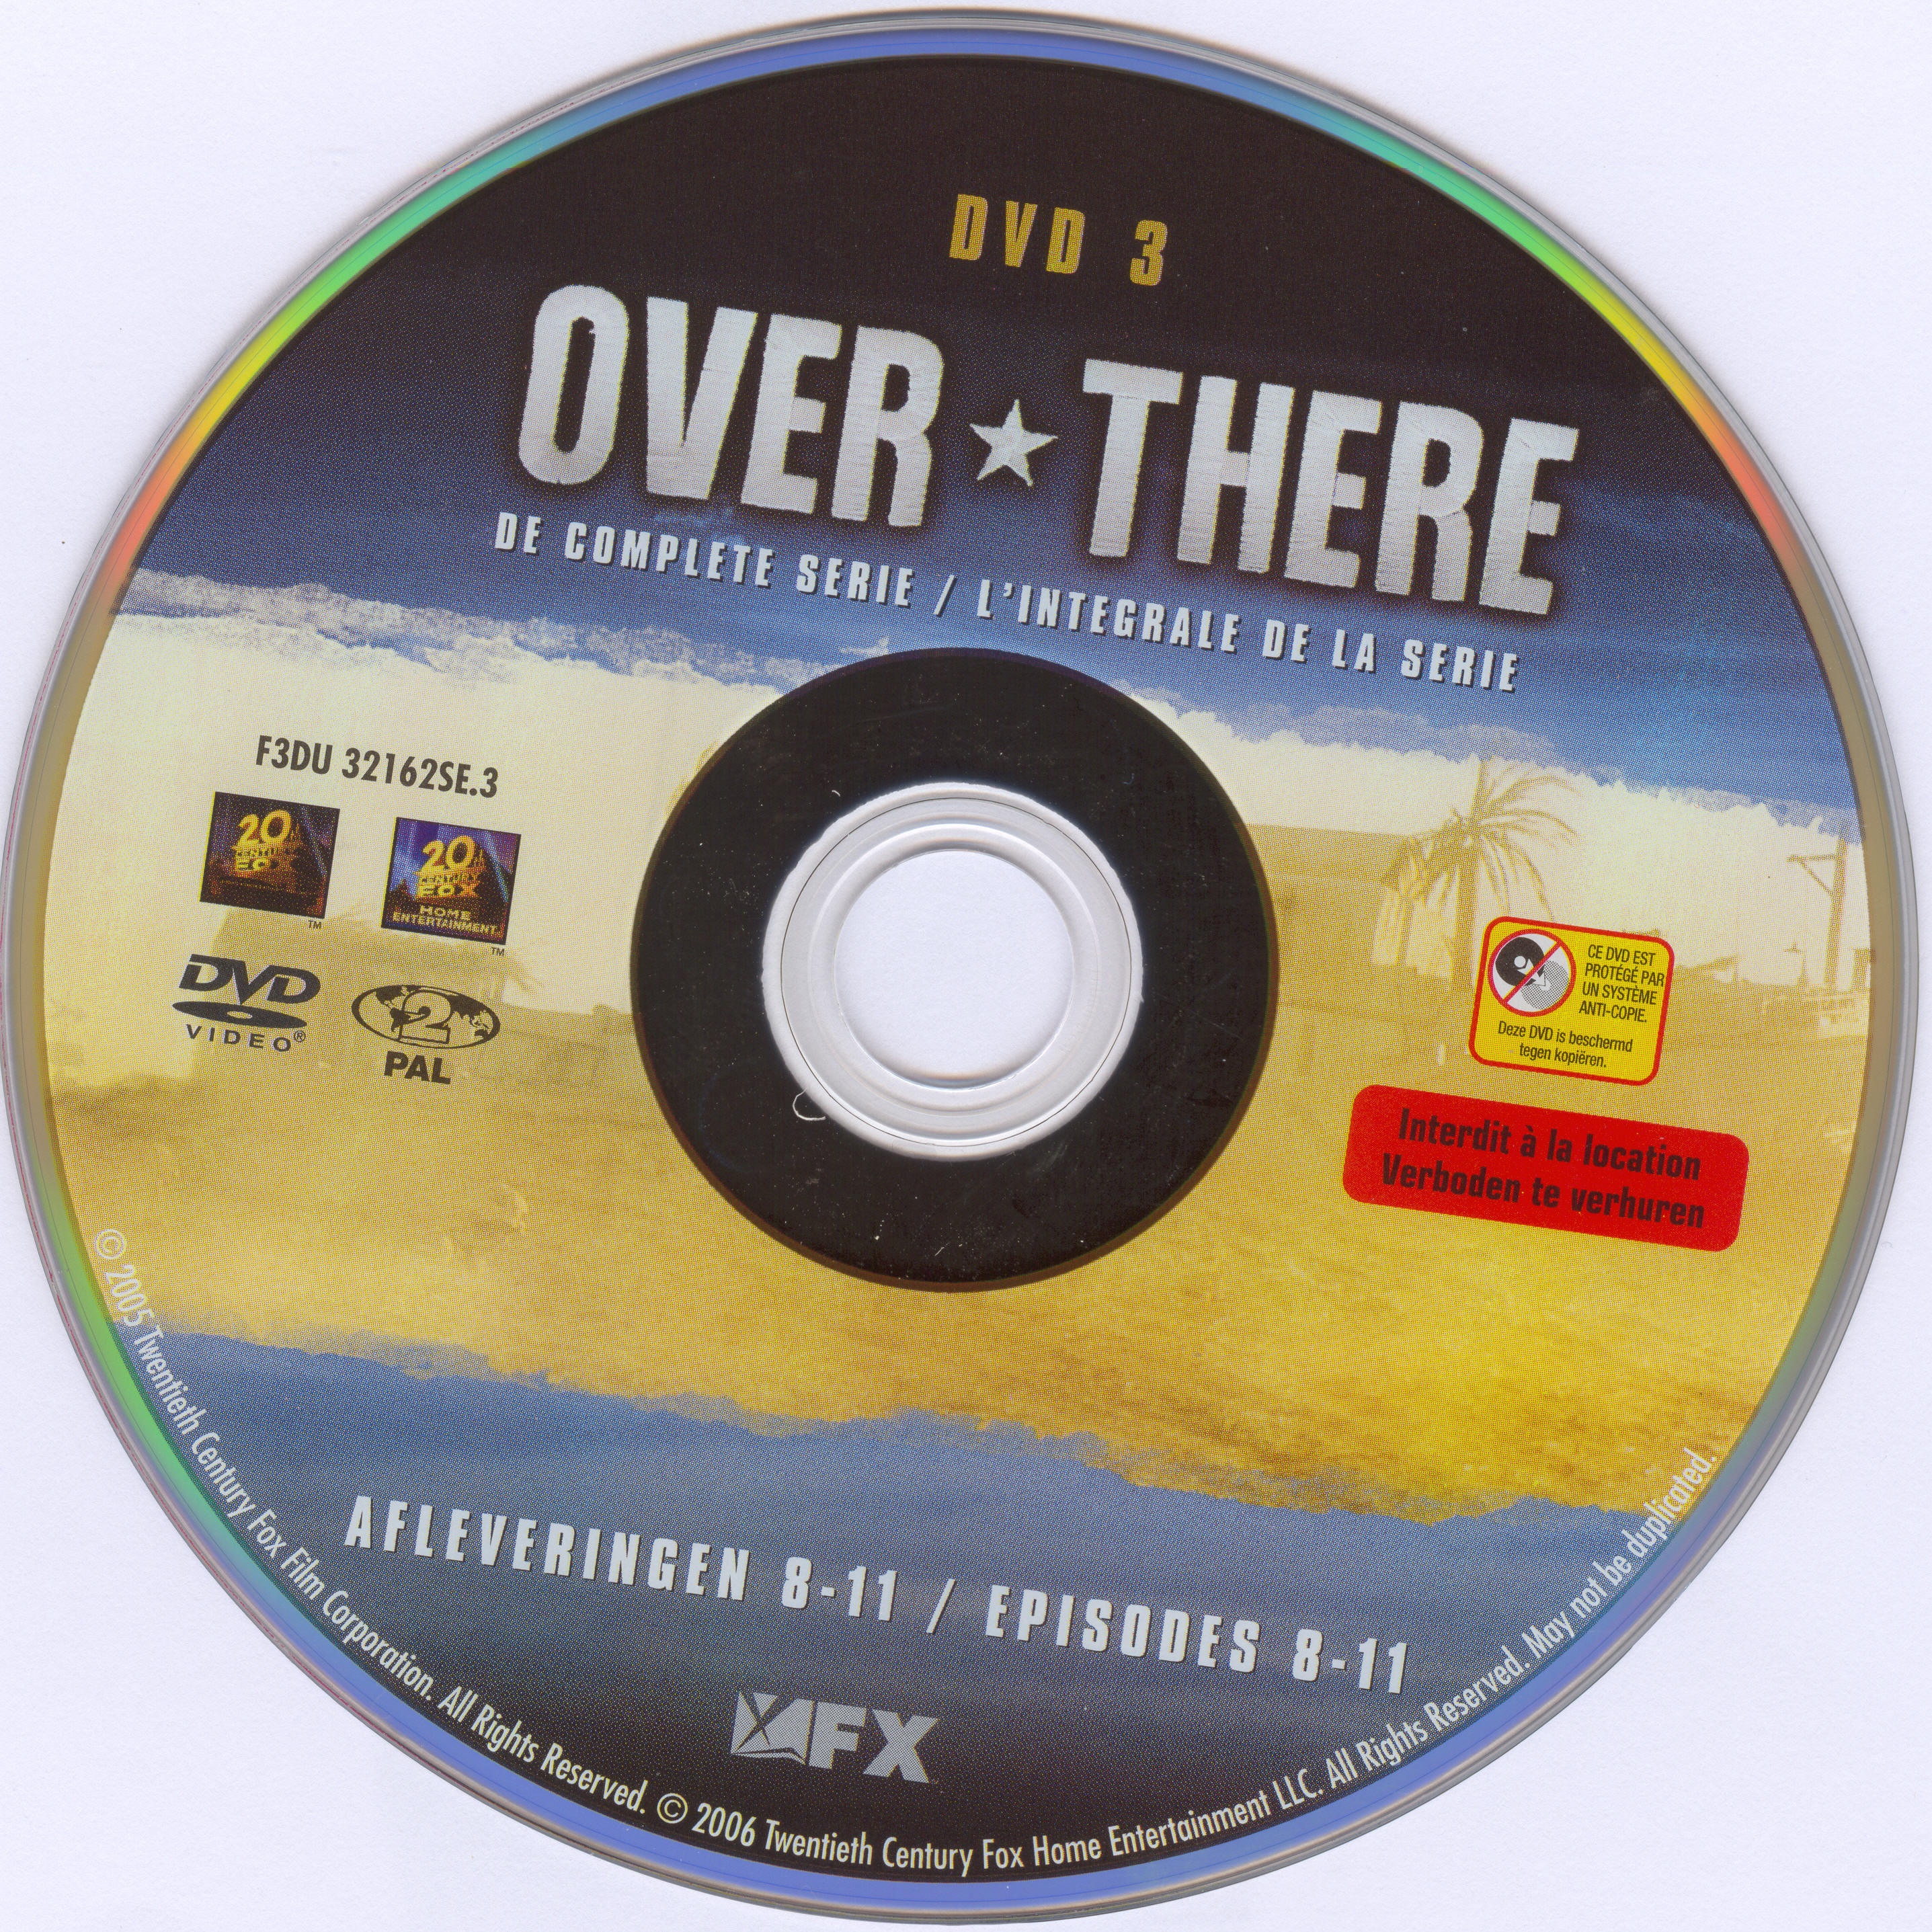 Over there DVD 3